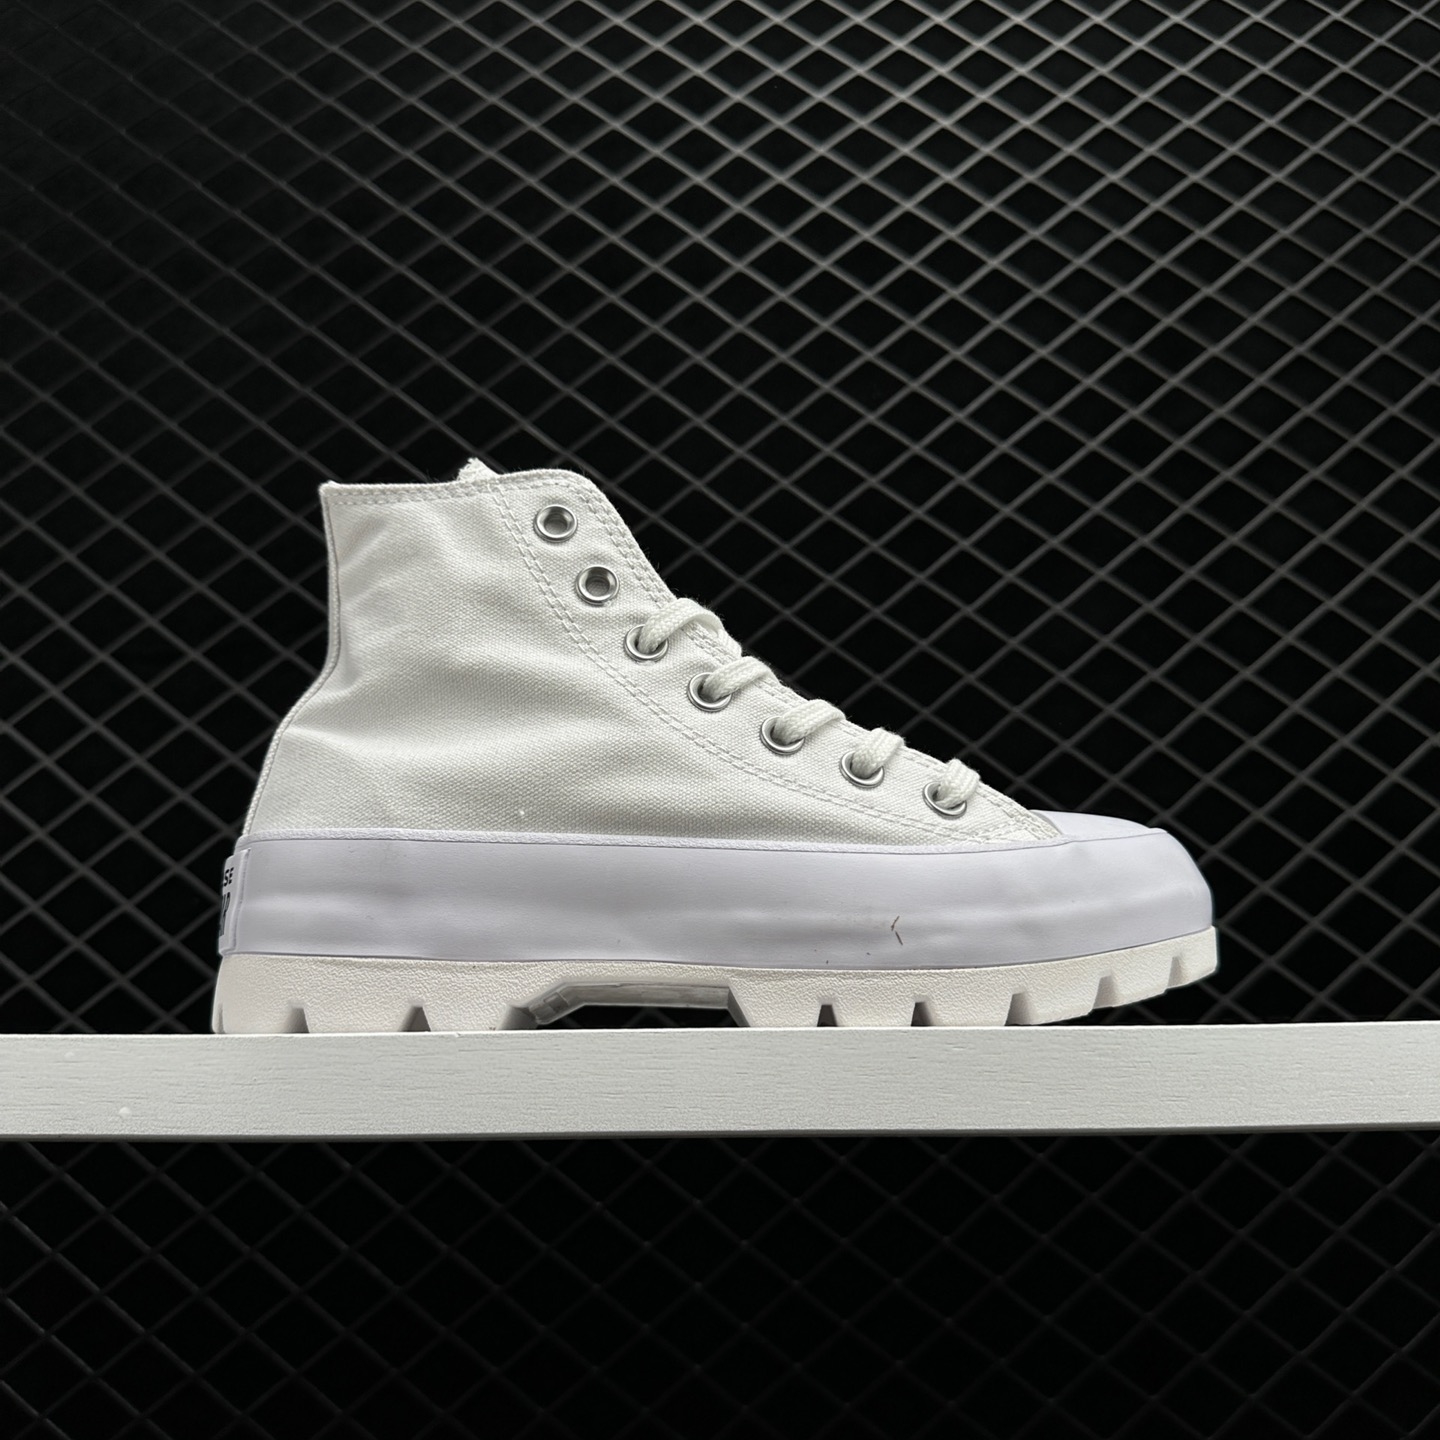 Converse Chuck Taylor All Star Lugged Hi White 565902C - Classic Design with a Bold Twist